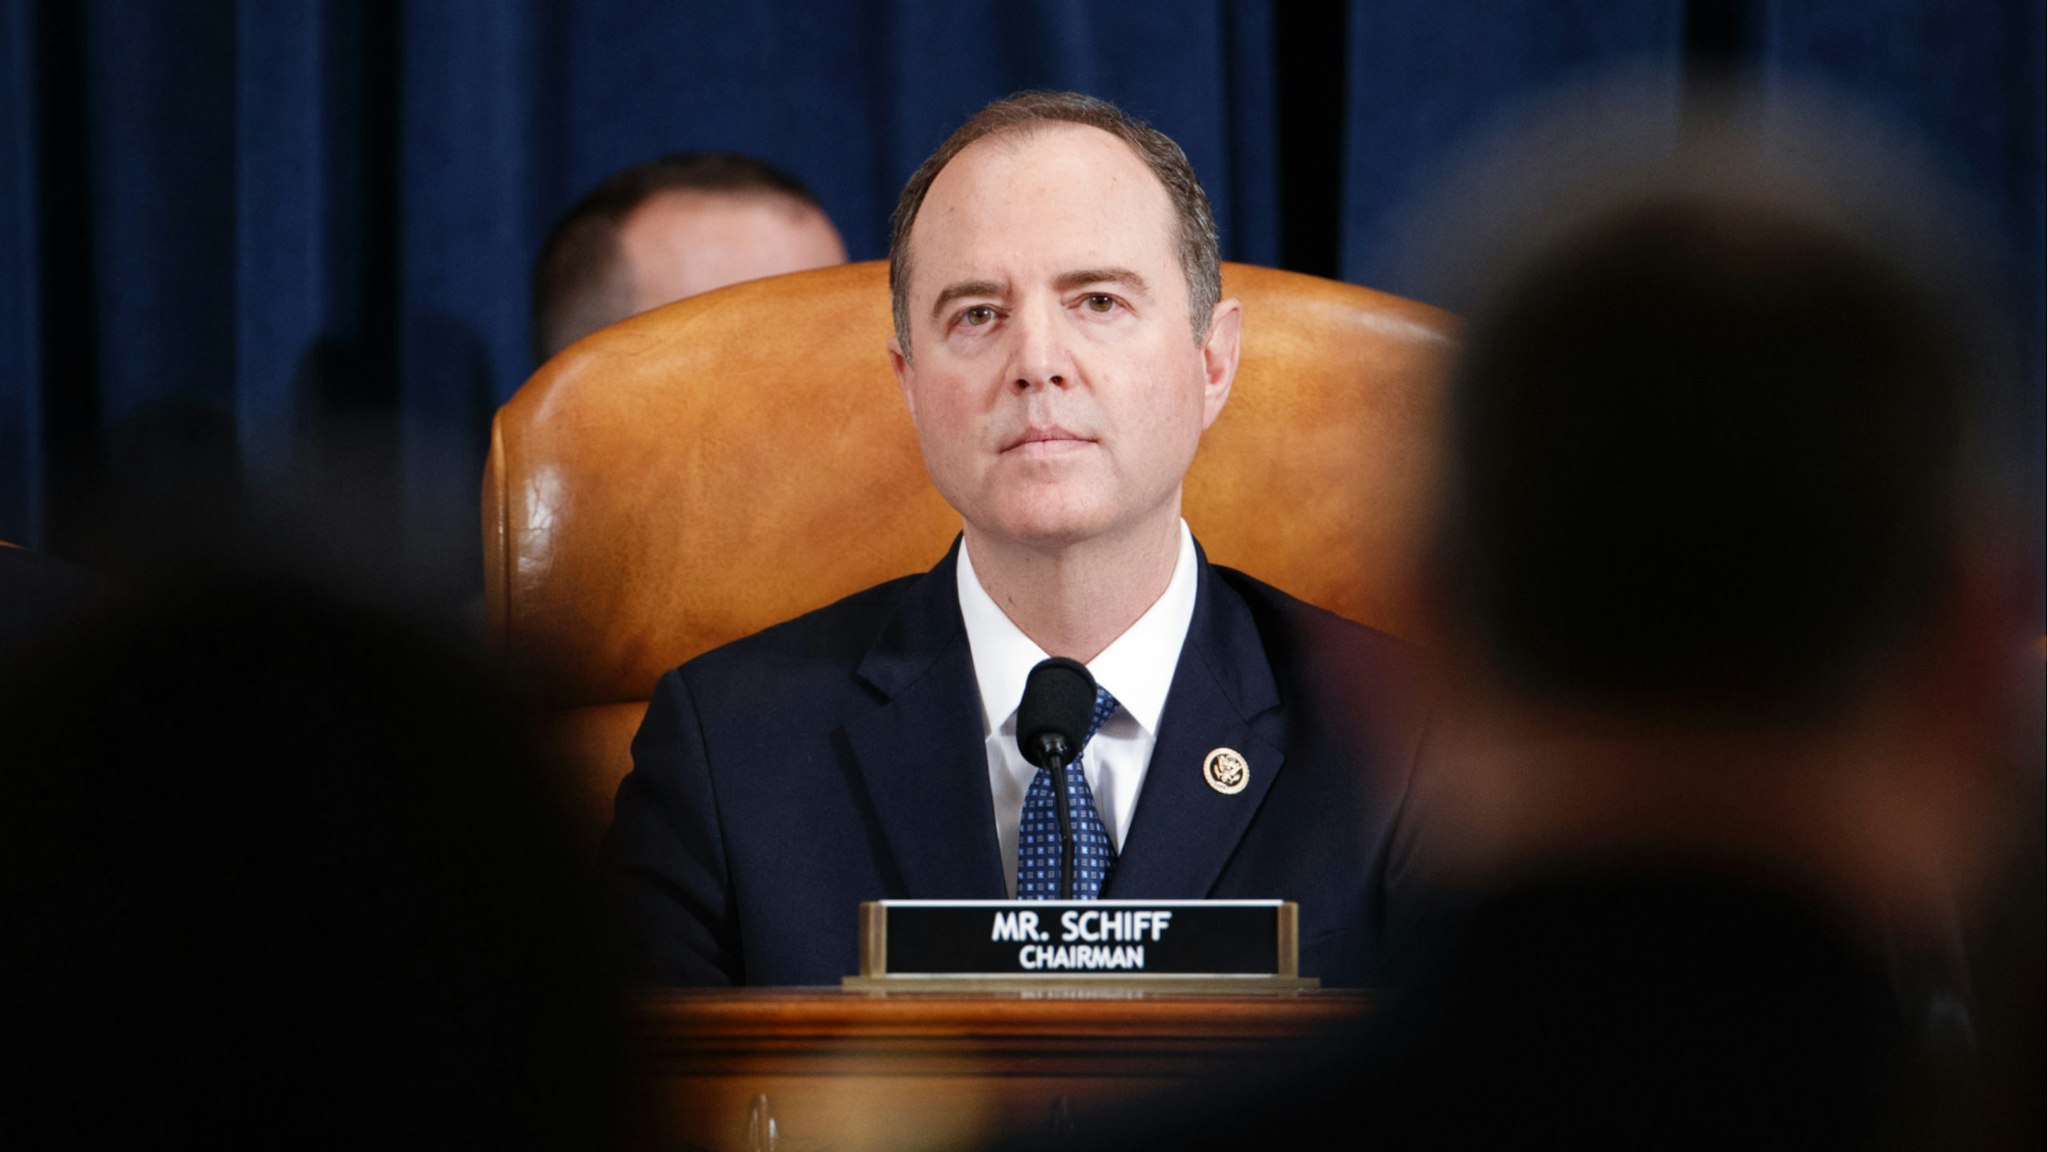 Committee Chairman Rep. Adam Schiff (D-CA) listens at the start of a hearing before the House Intelligence Committee in the Longworth House Office Building on Capitol Hill November 19, 2019 in Washington, DC.